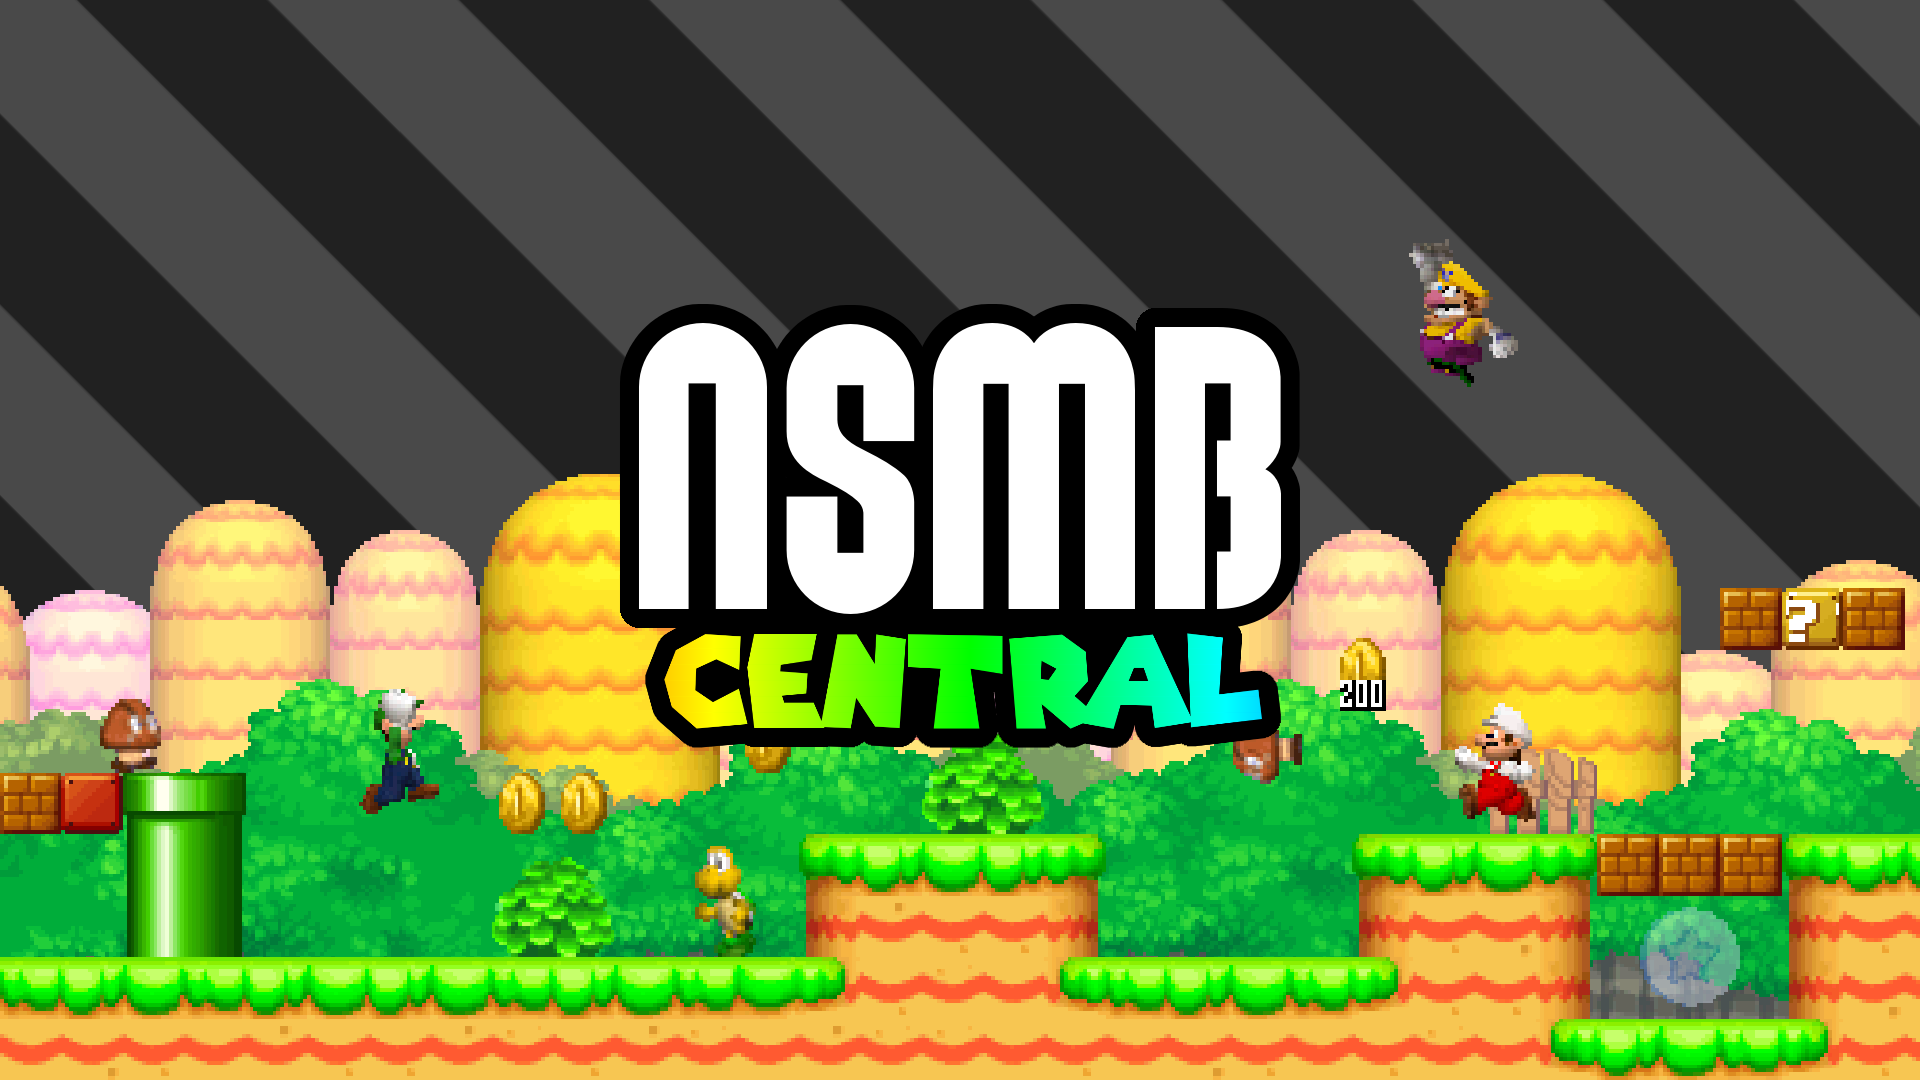 A banner for NSMB Central